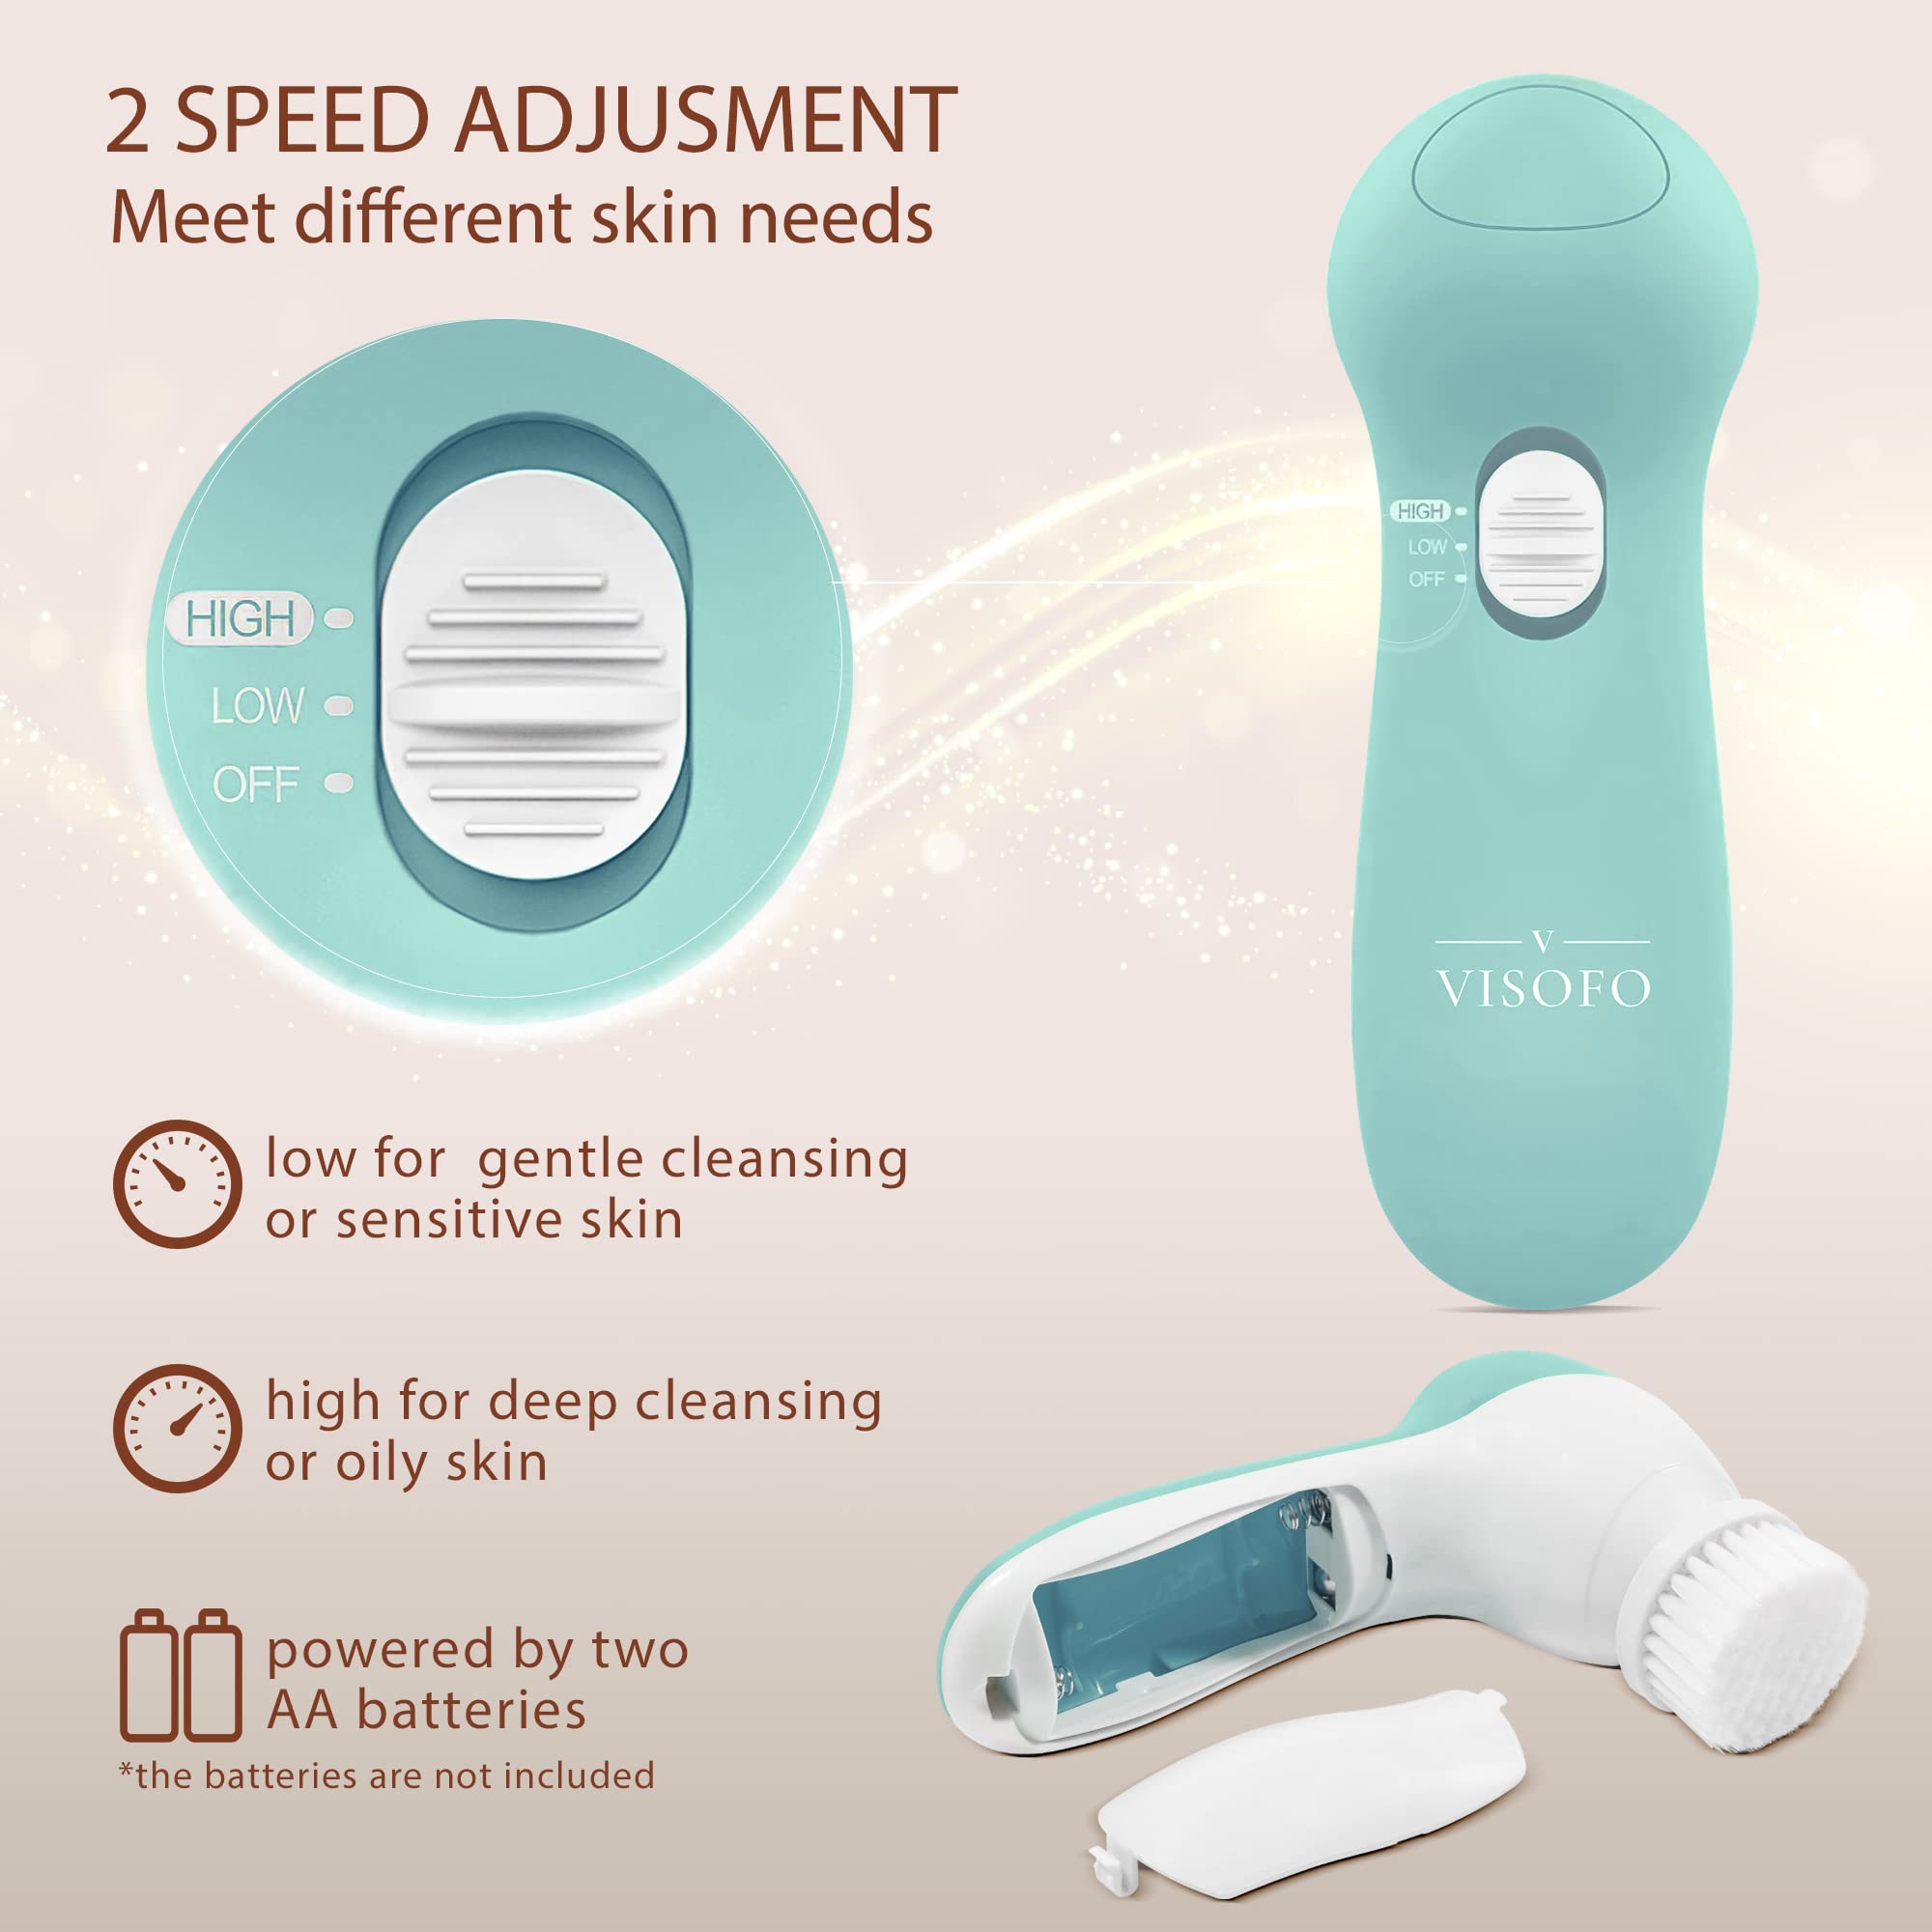 Face Scrubber | Facial Cleansing Brush Exfoliator Skin Care Beauty Products Powered Electric Wash Exfoliating Skincare Women Spin Cleanser Tools Cleaning Scrub Washer Self Care (Opal)